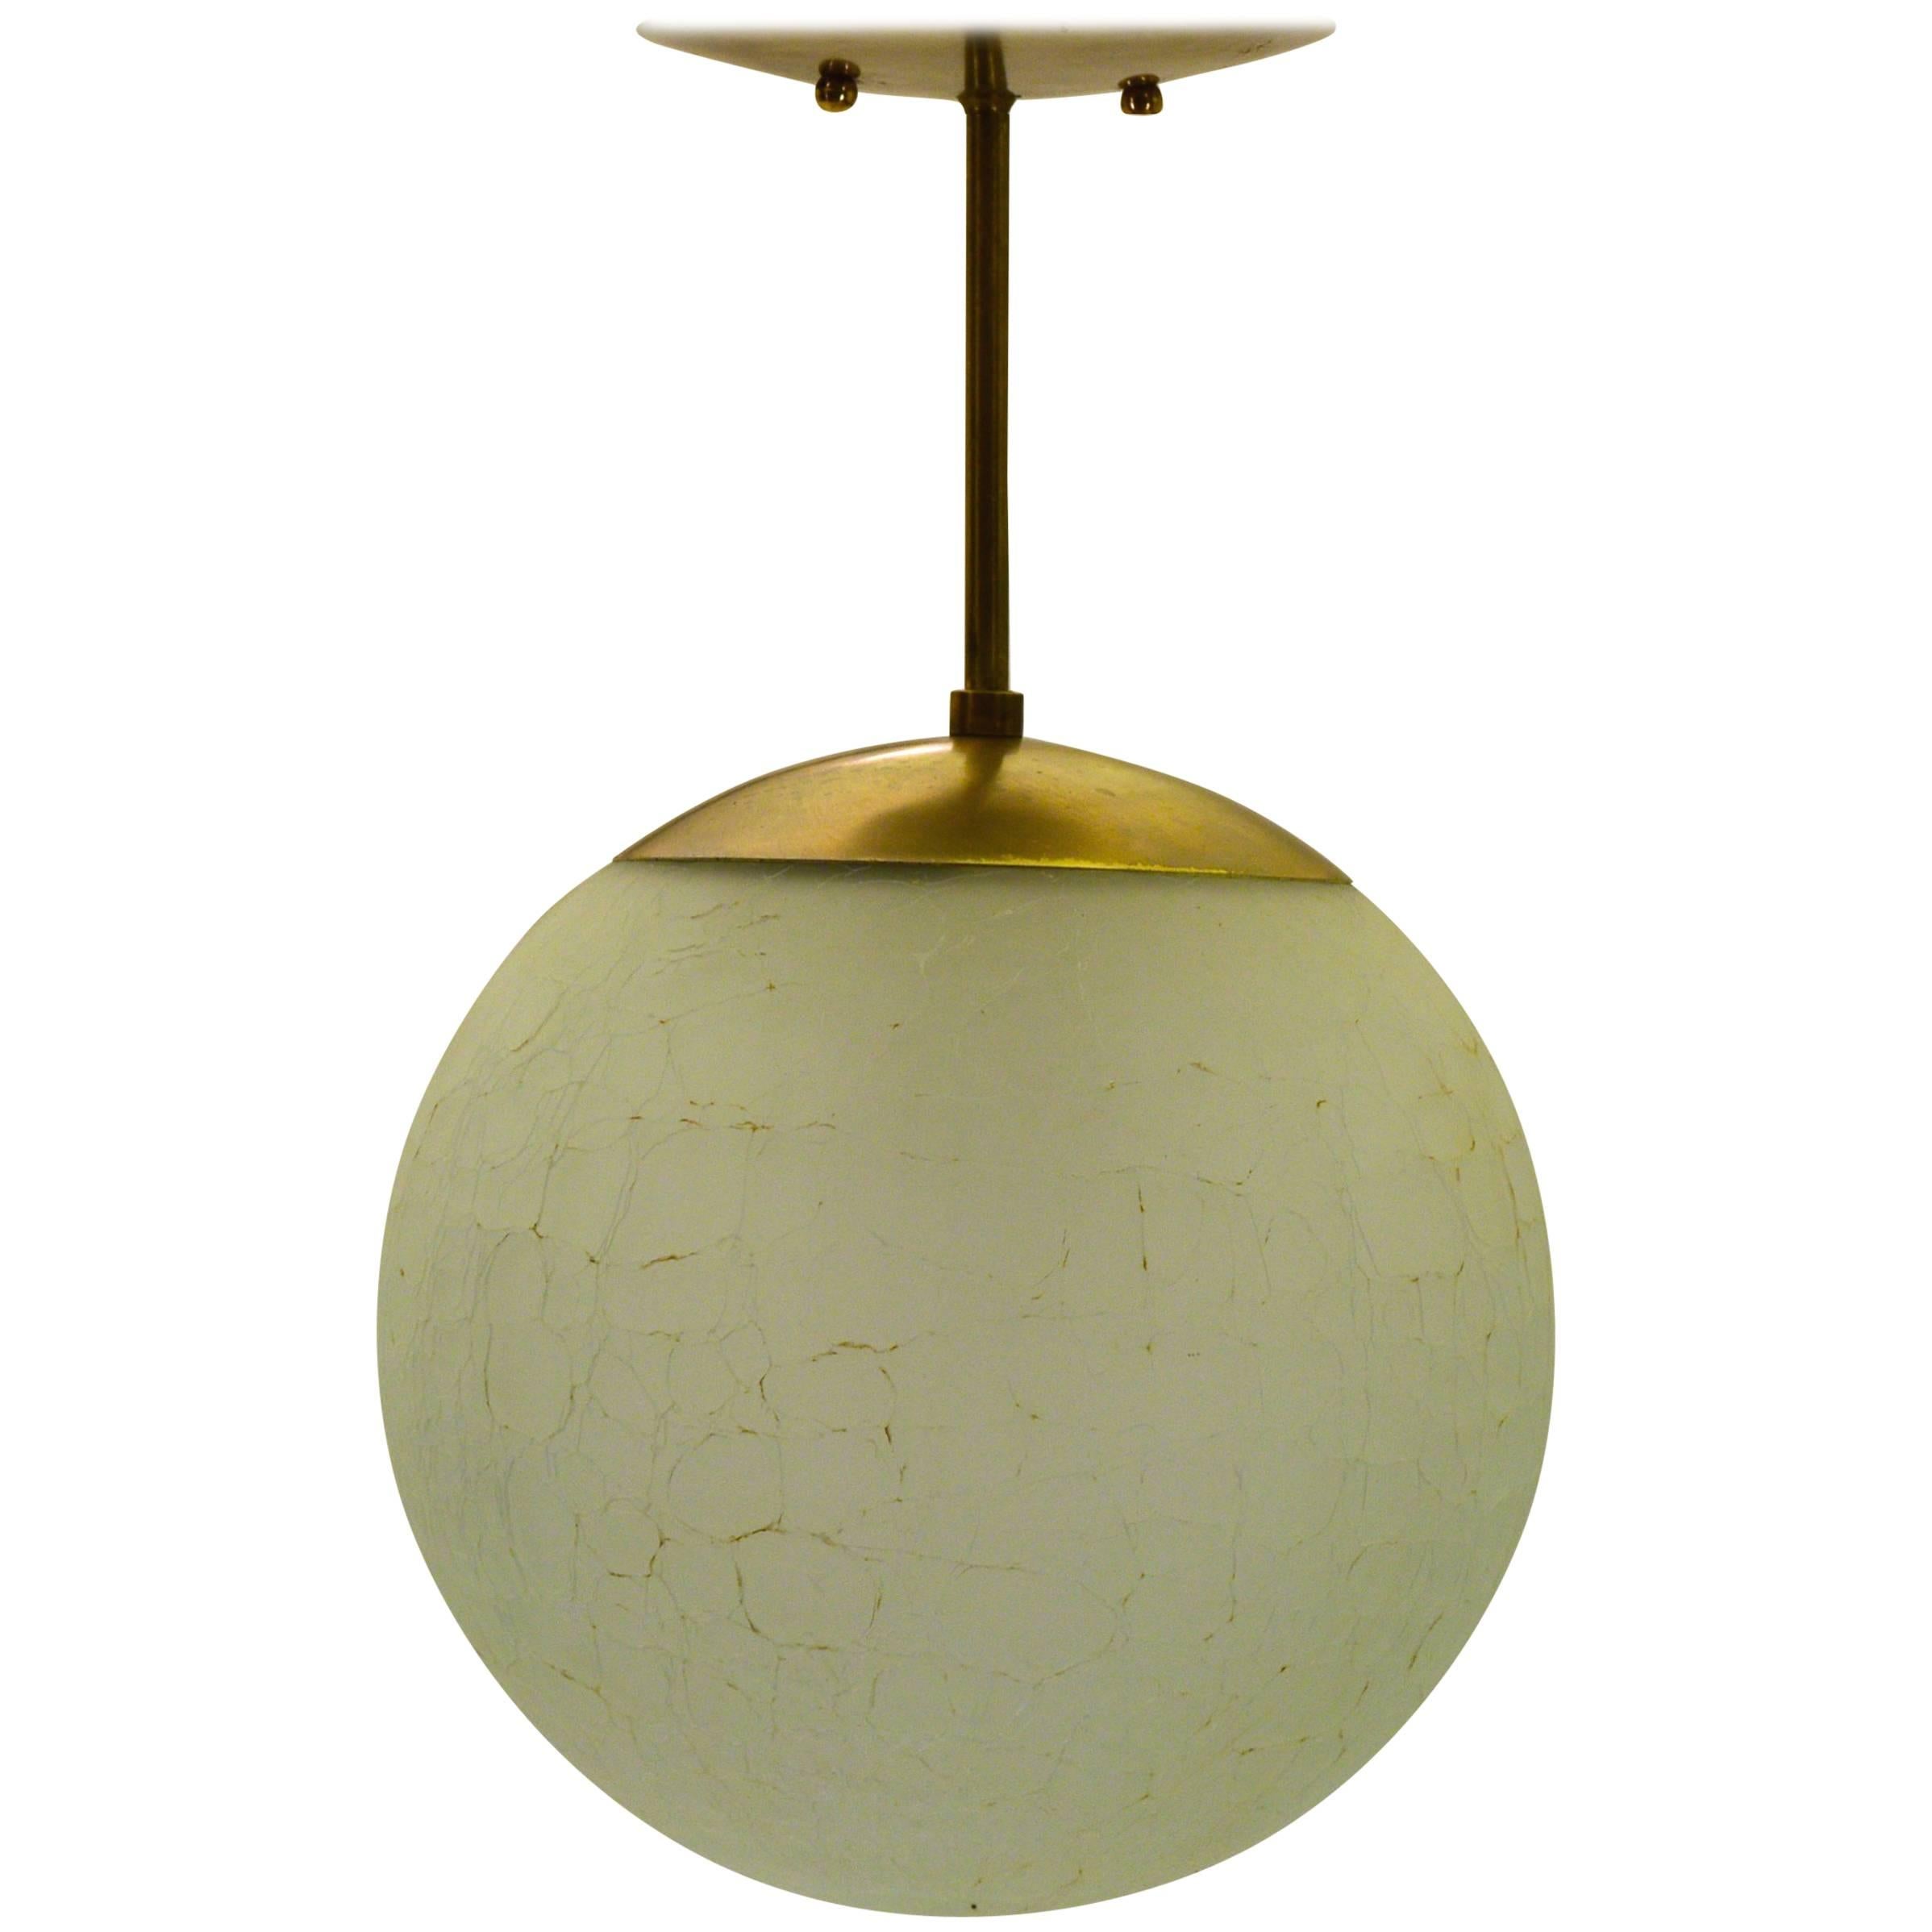 Exceptional Crackled Glass Globe Pendant Lamp by Moe Lighting